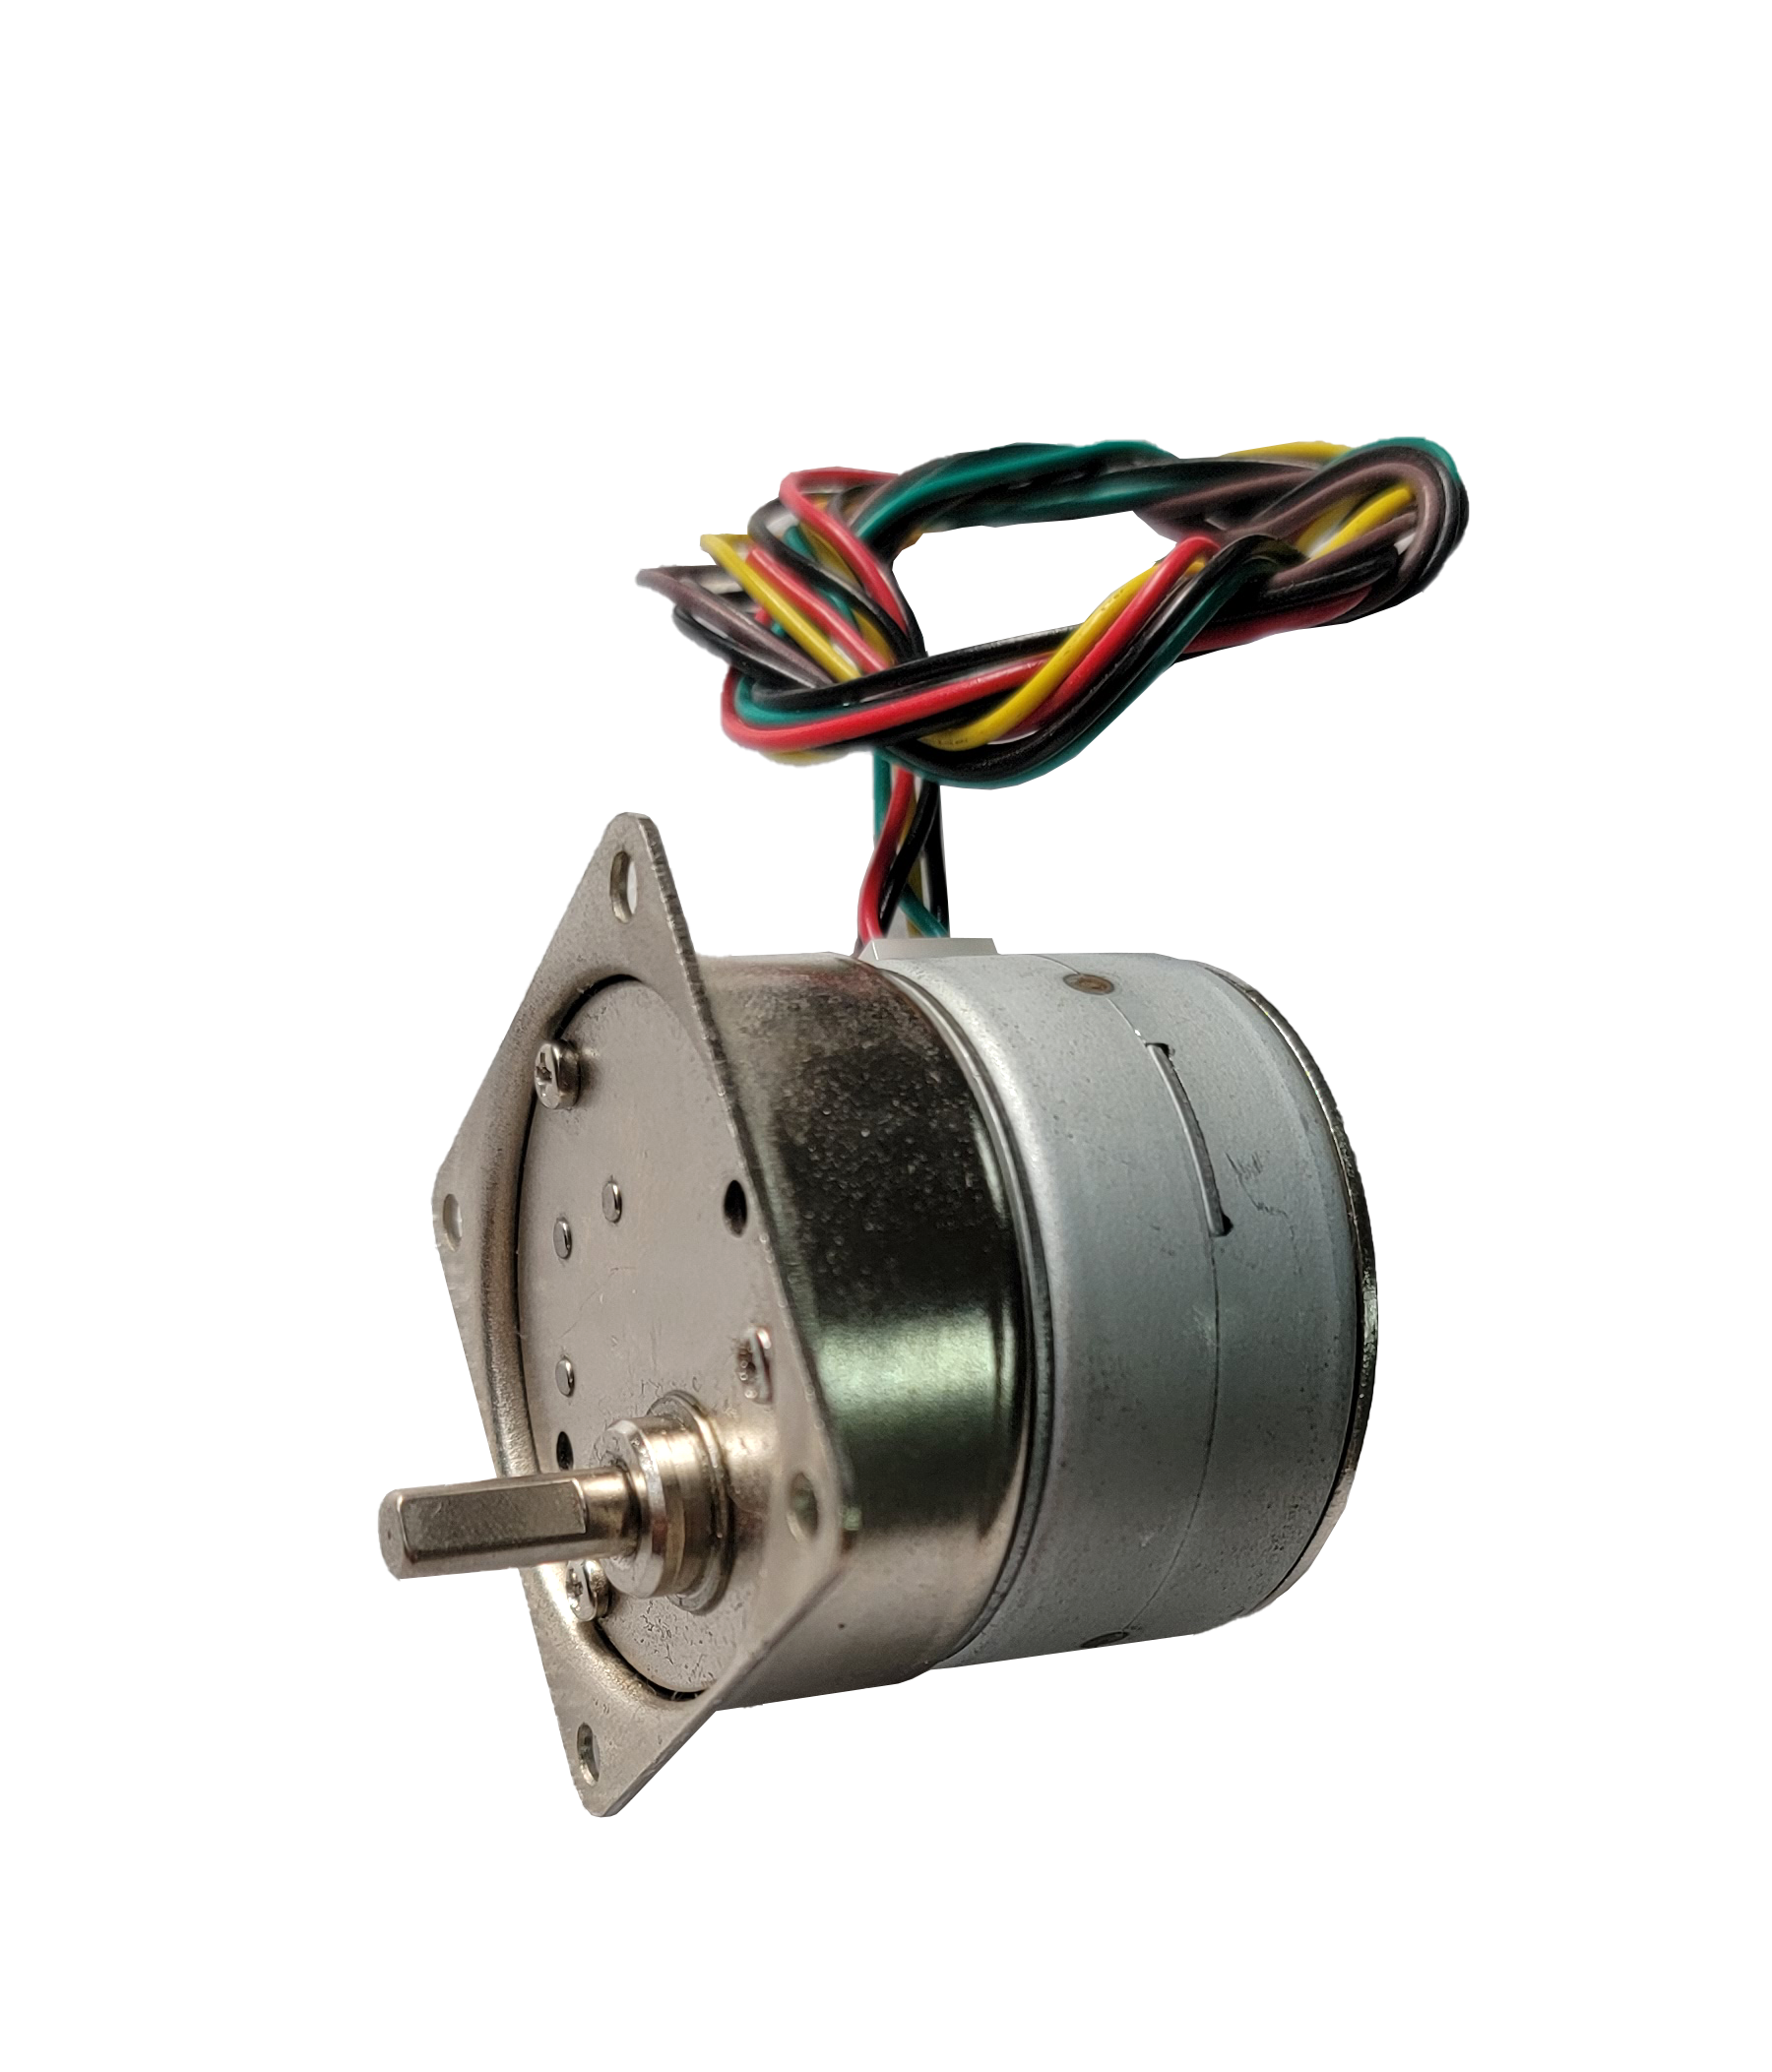 wholesale Dc Geared Motor 24v –  7.5 ° geared stepper motor from Shenzhen manufacturer with quality price & service – Bobet